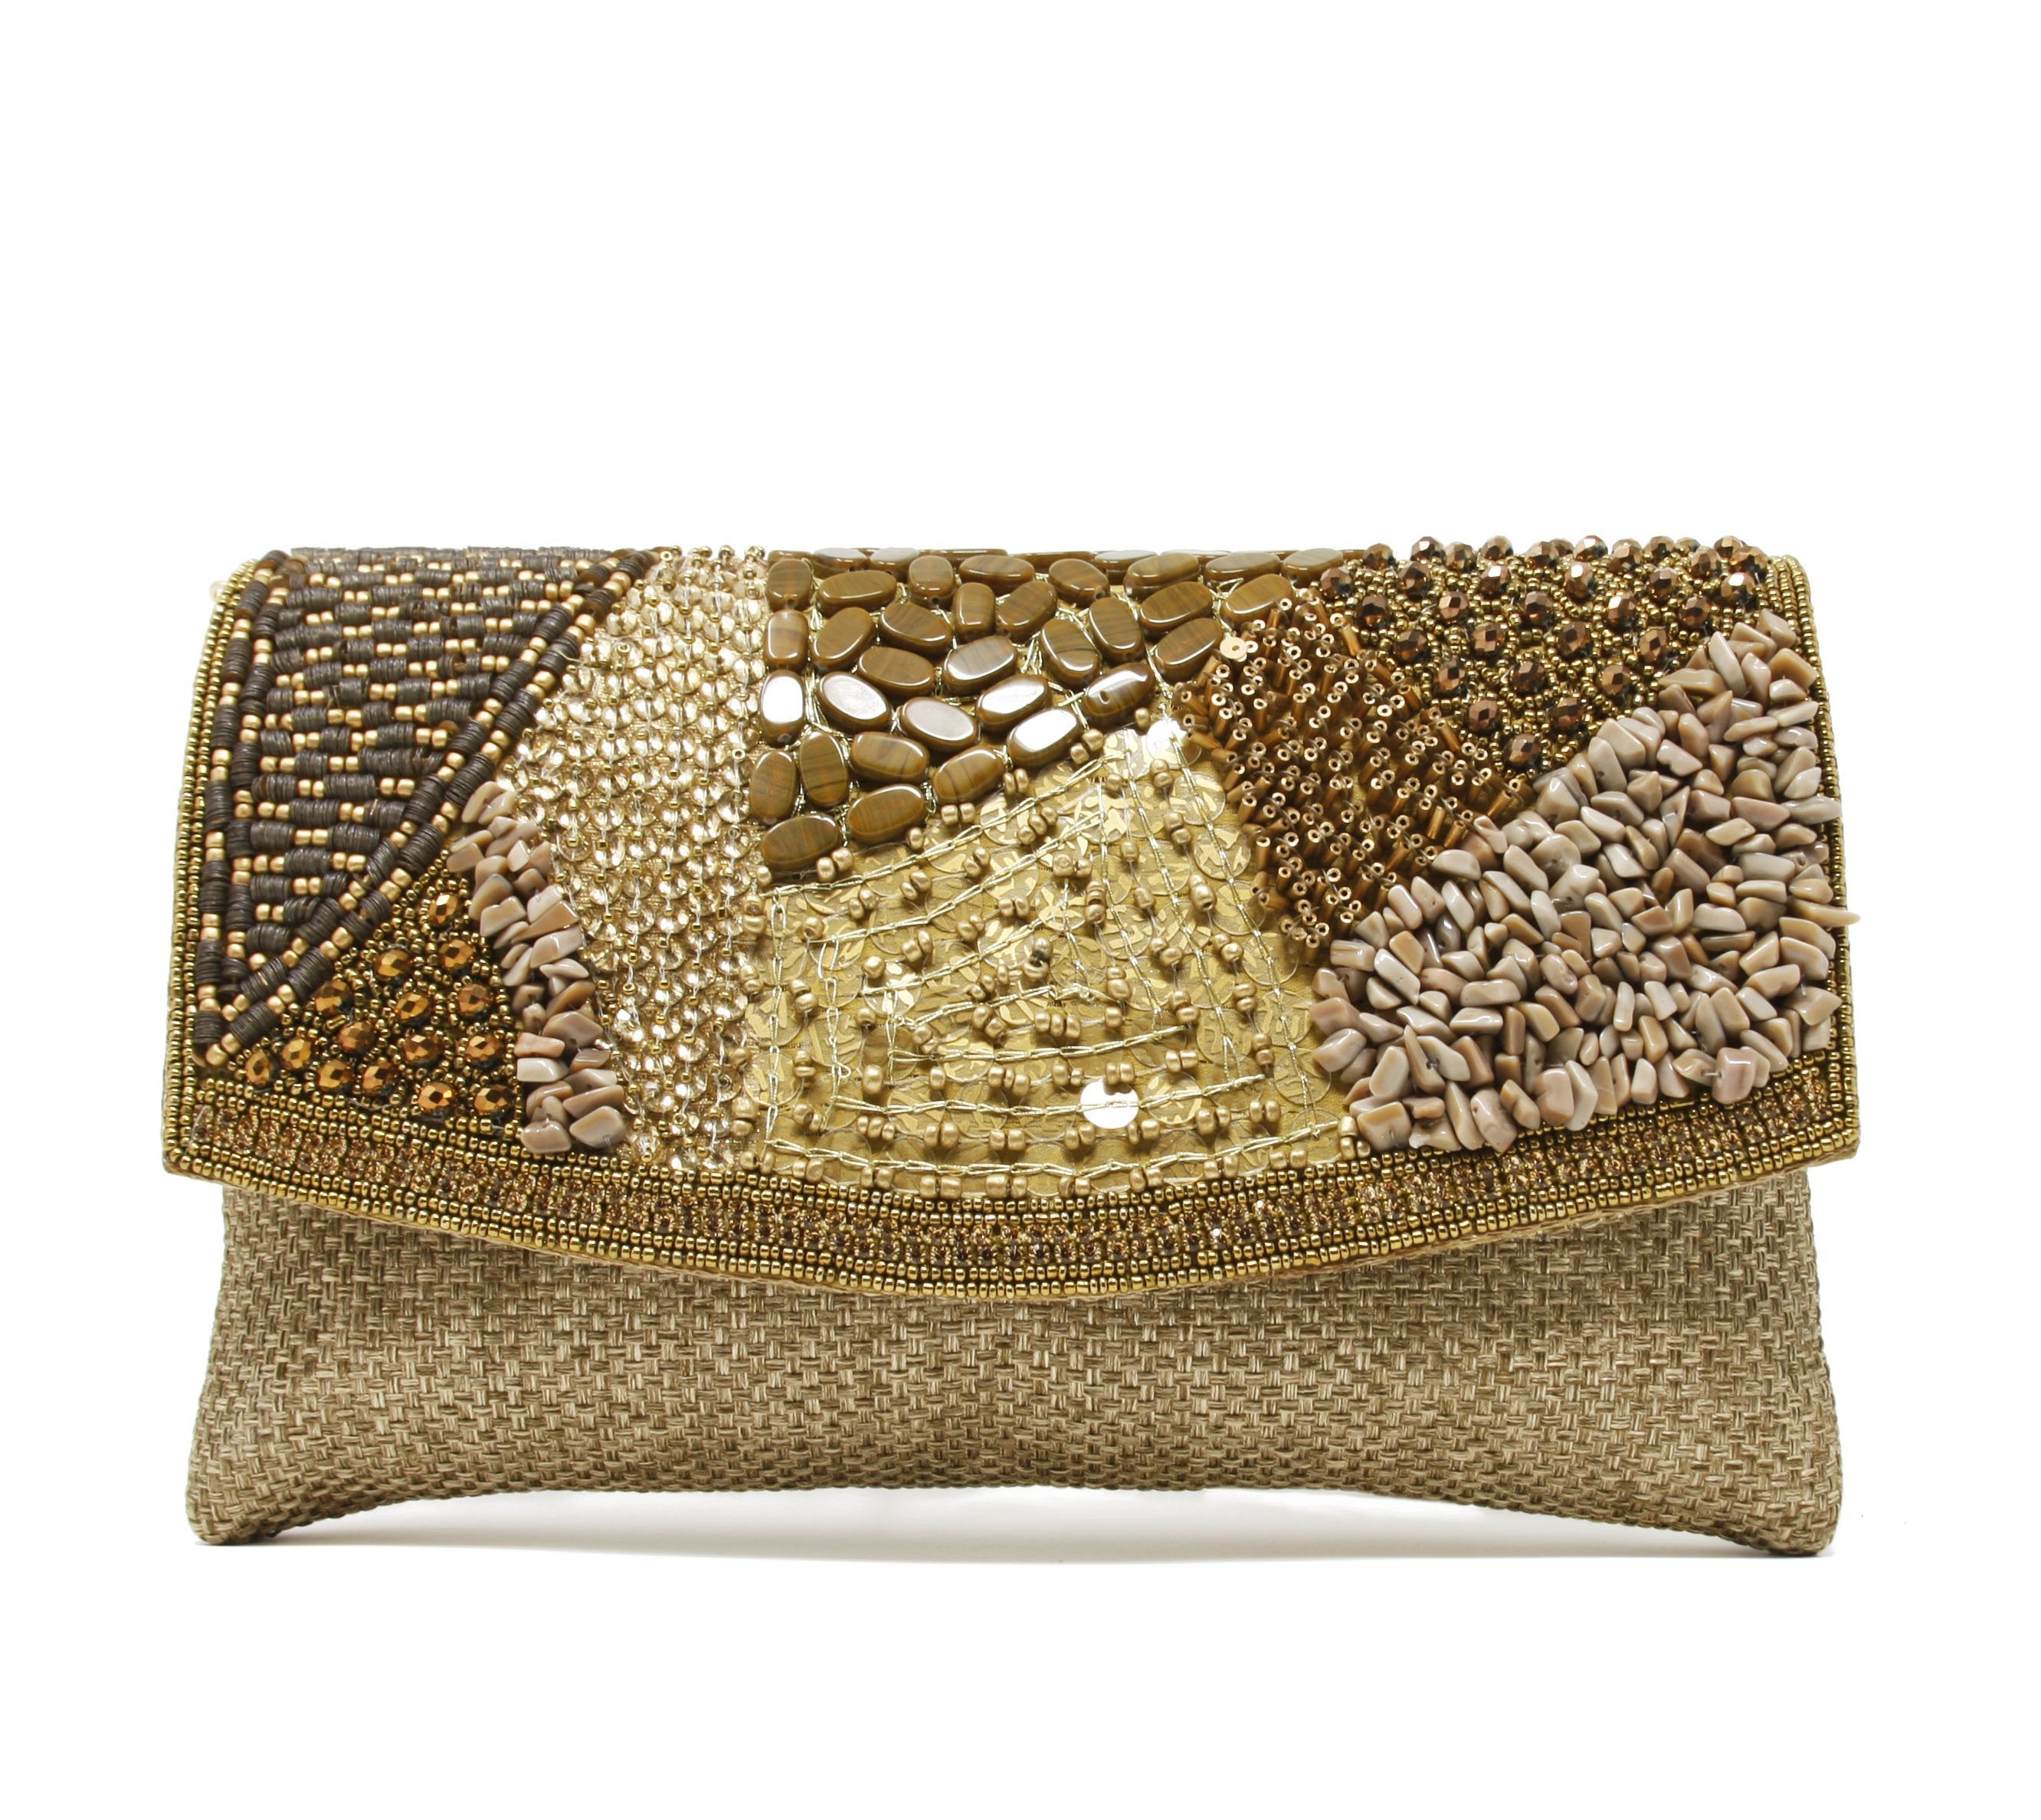 Beige clutch with patches of gold and shades of brown, Embroidered with rhinestones 